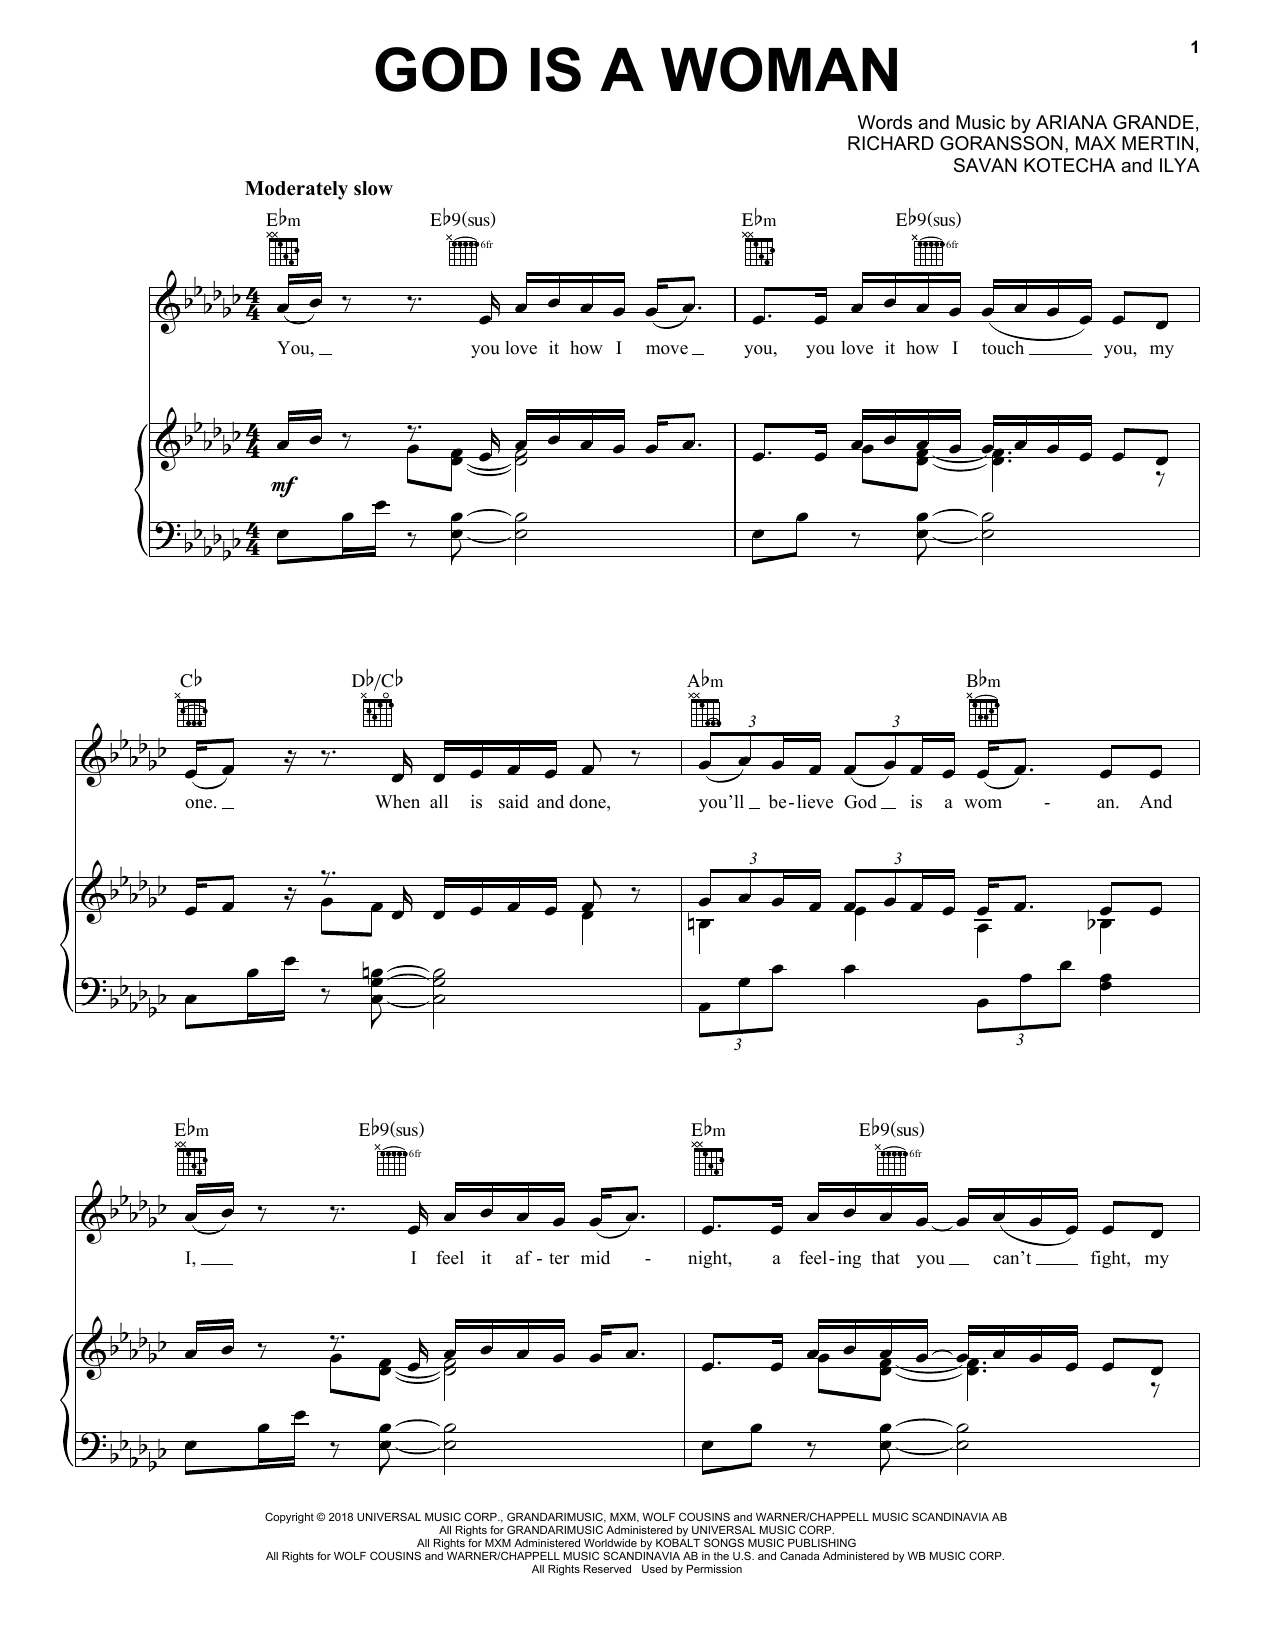 Ariana Grande God Is A Woman sheet music notes and chords. Download Printable PDF.